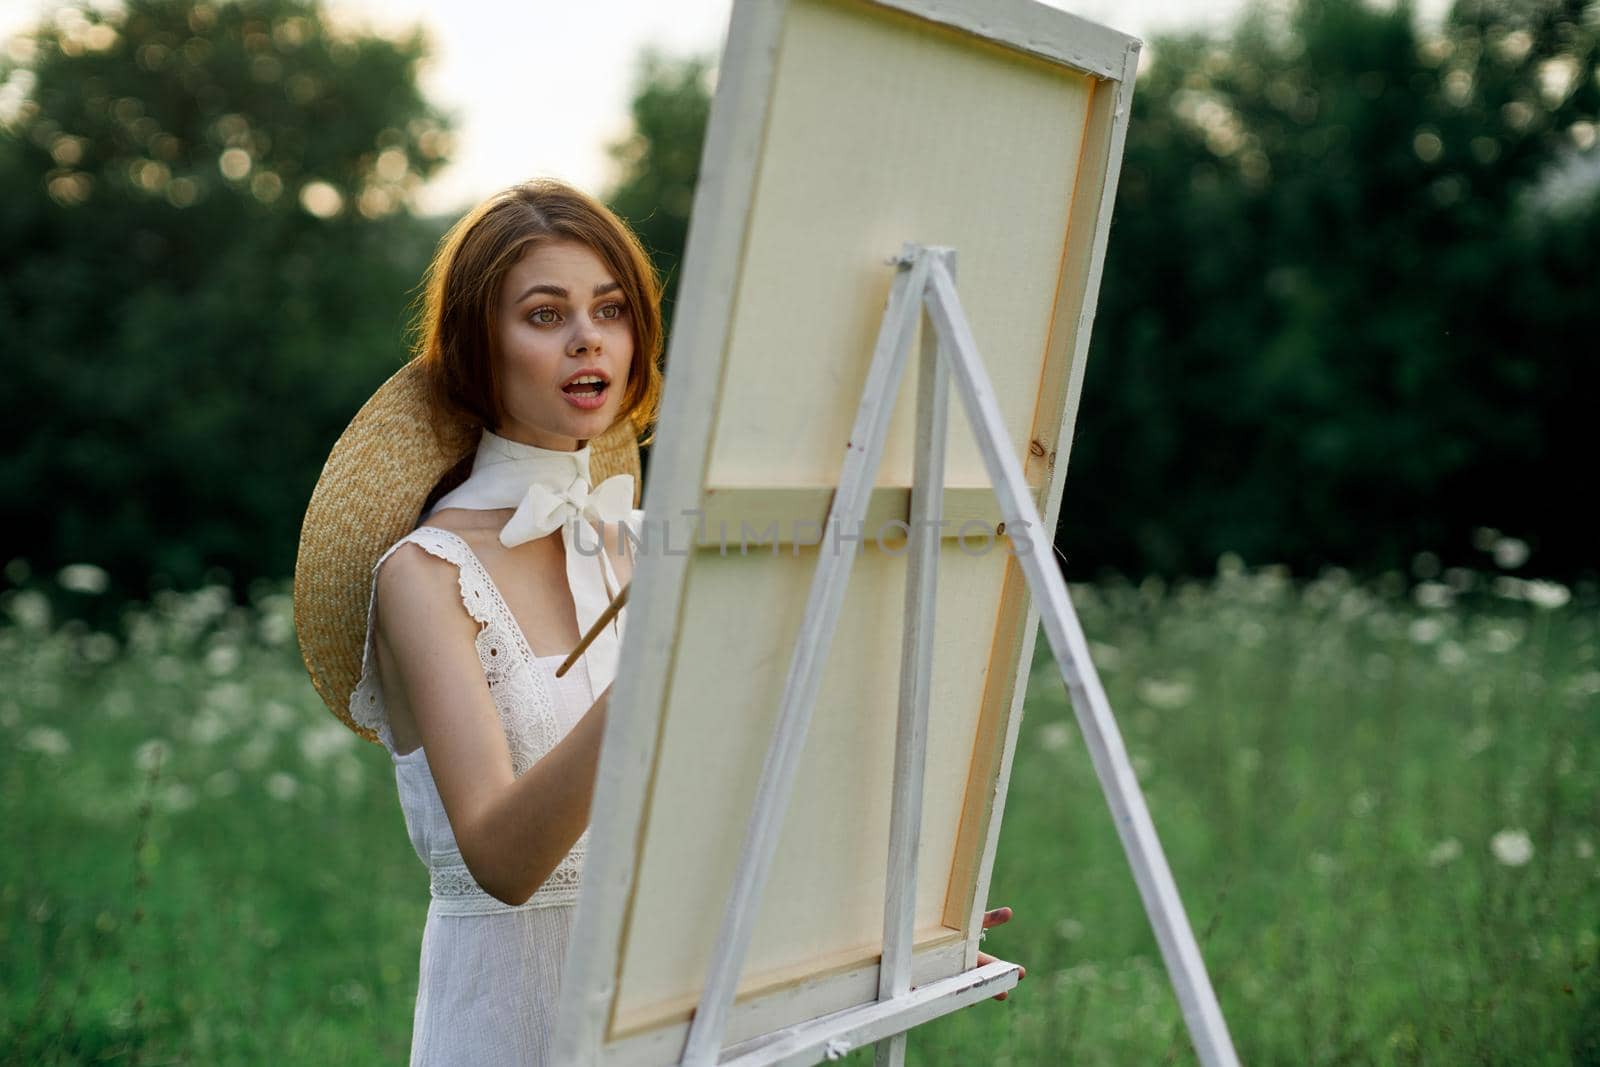 Woman in white dress paints a picture outdoors hobby creative by Vichizh